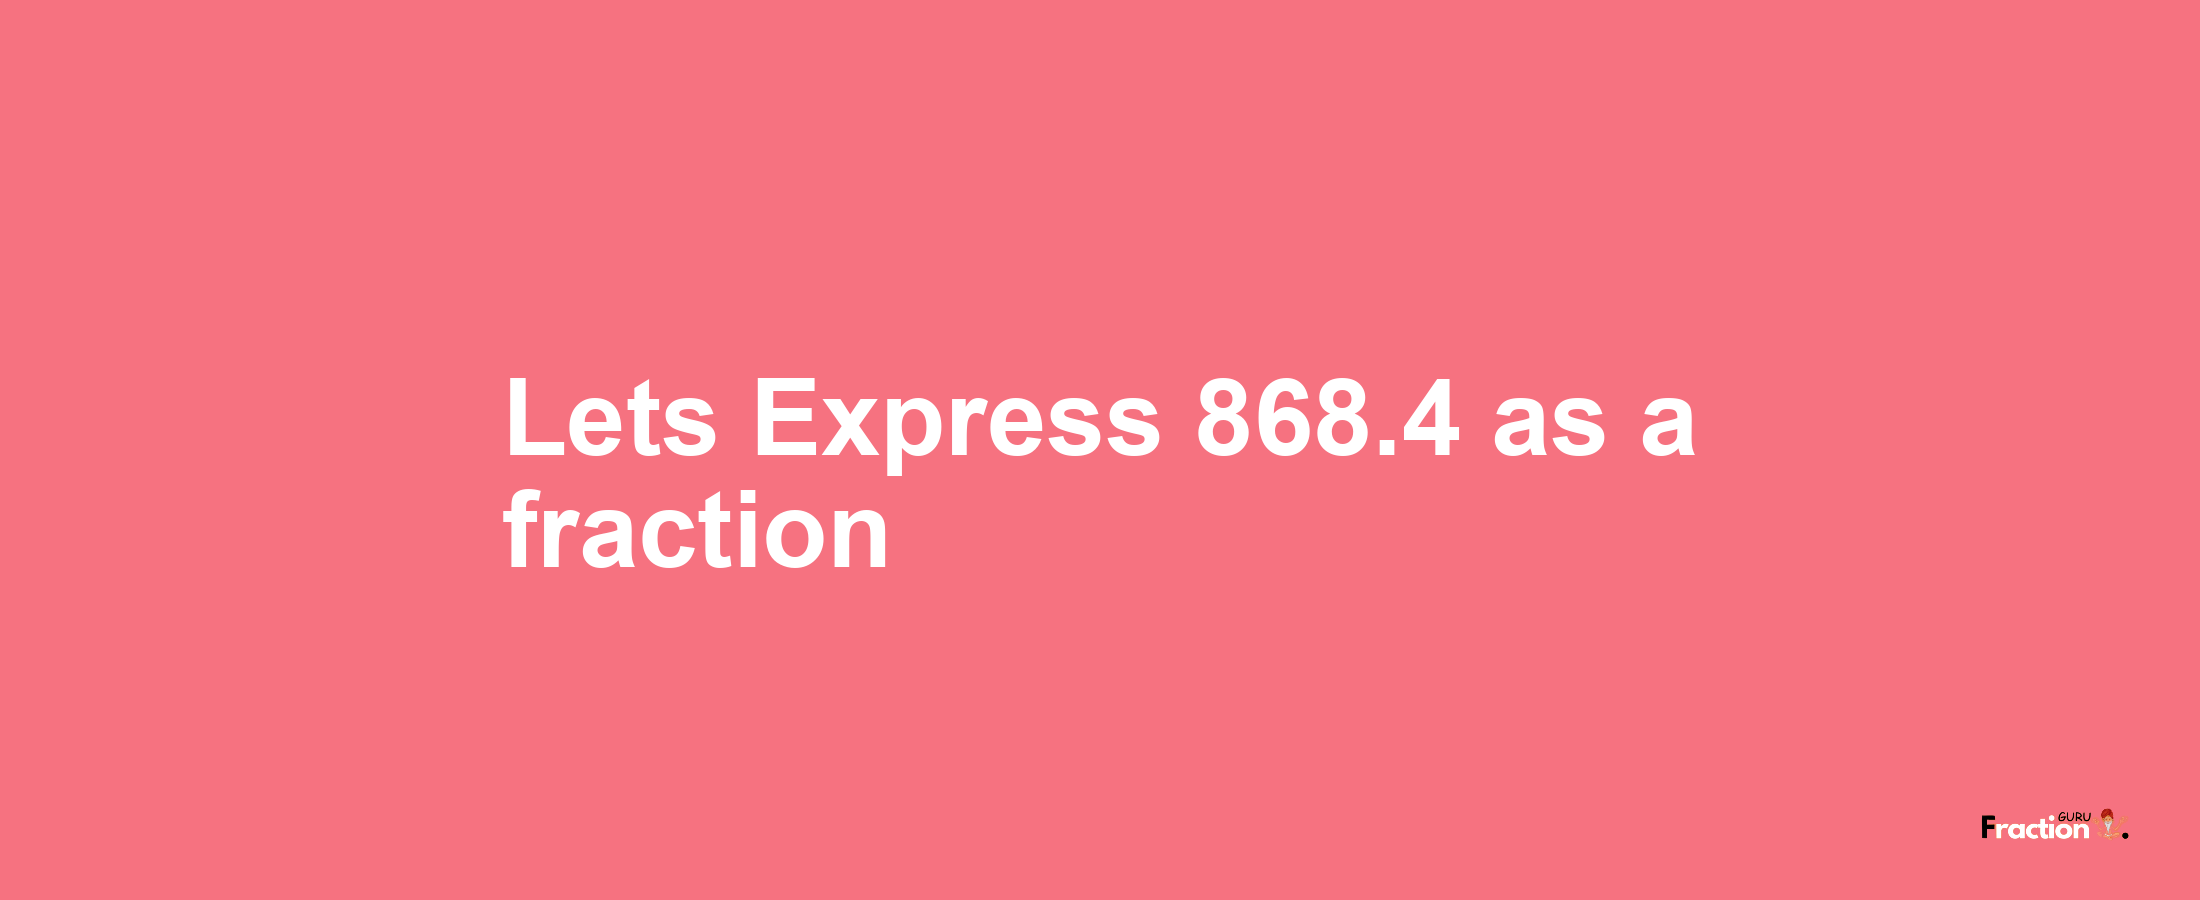 Lets Express 868.4 as afraction